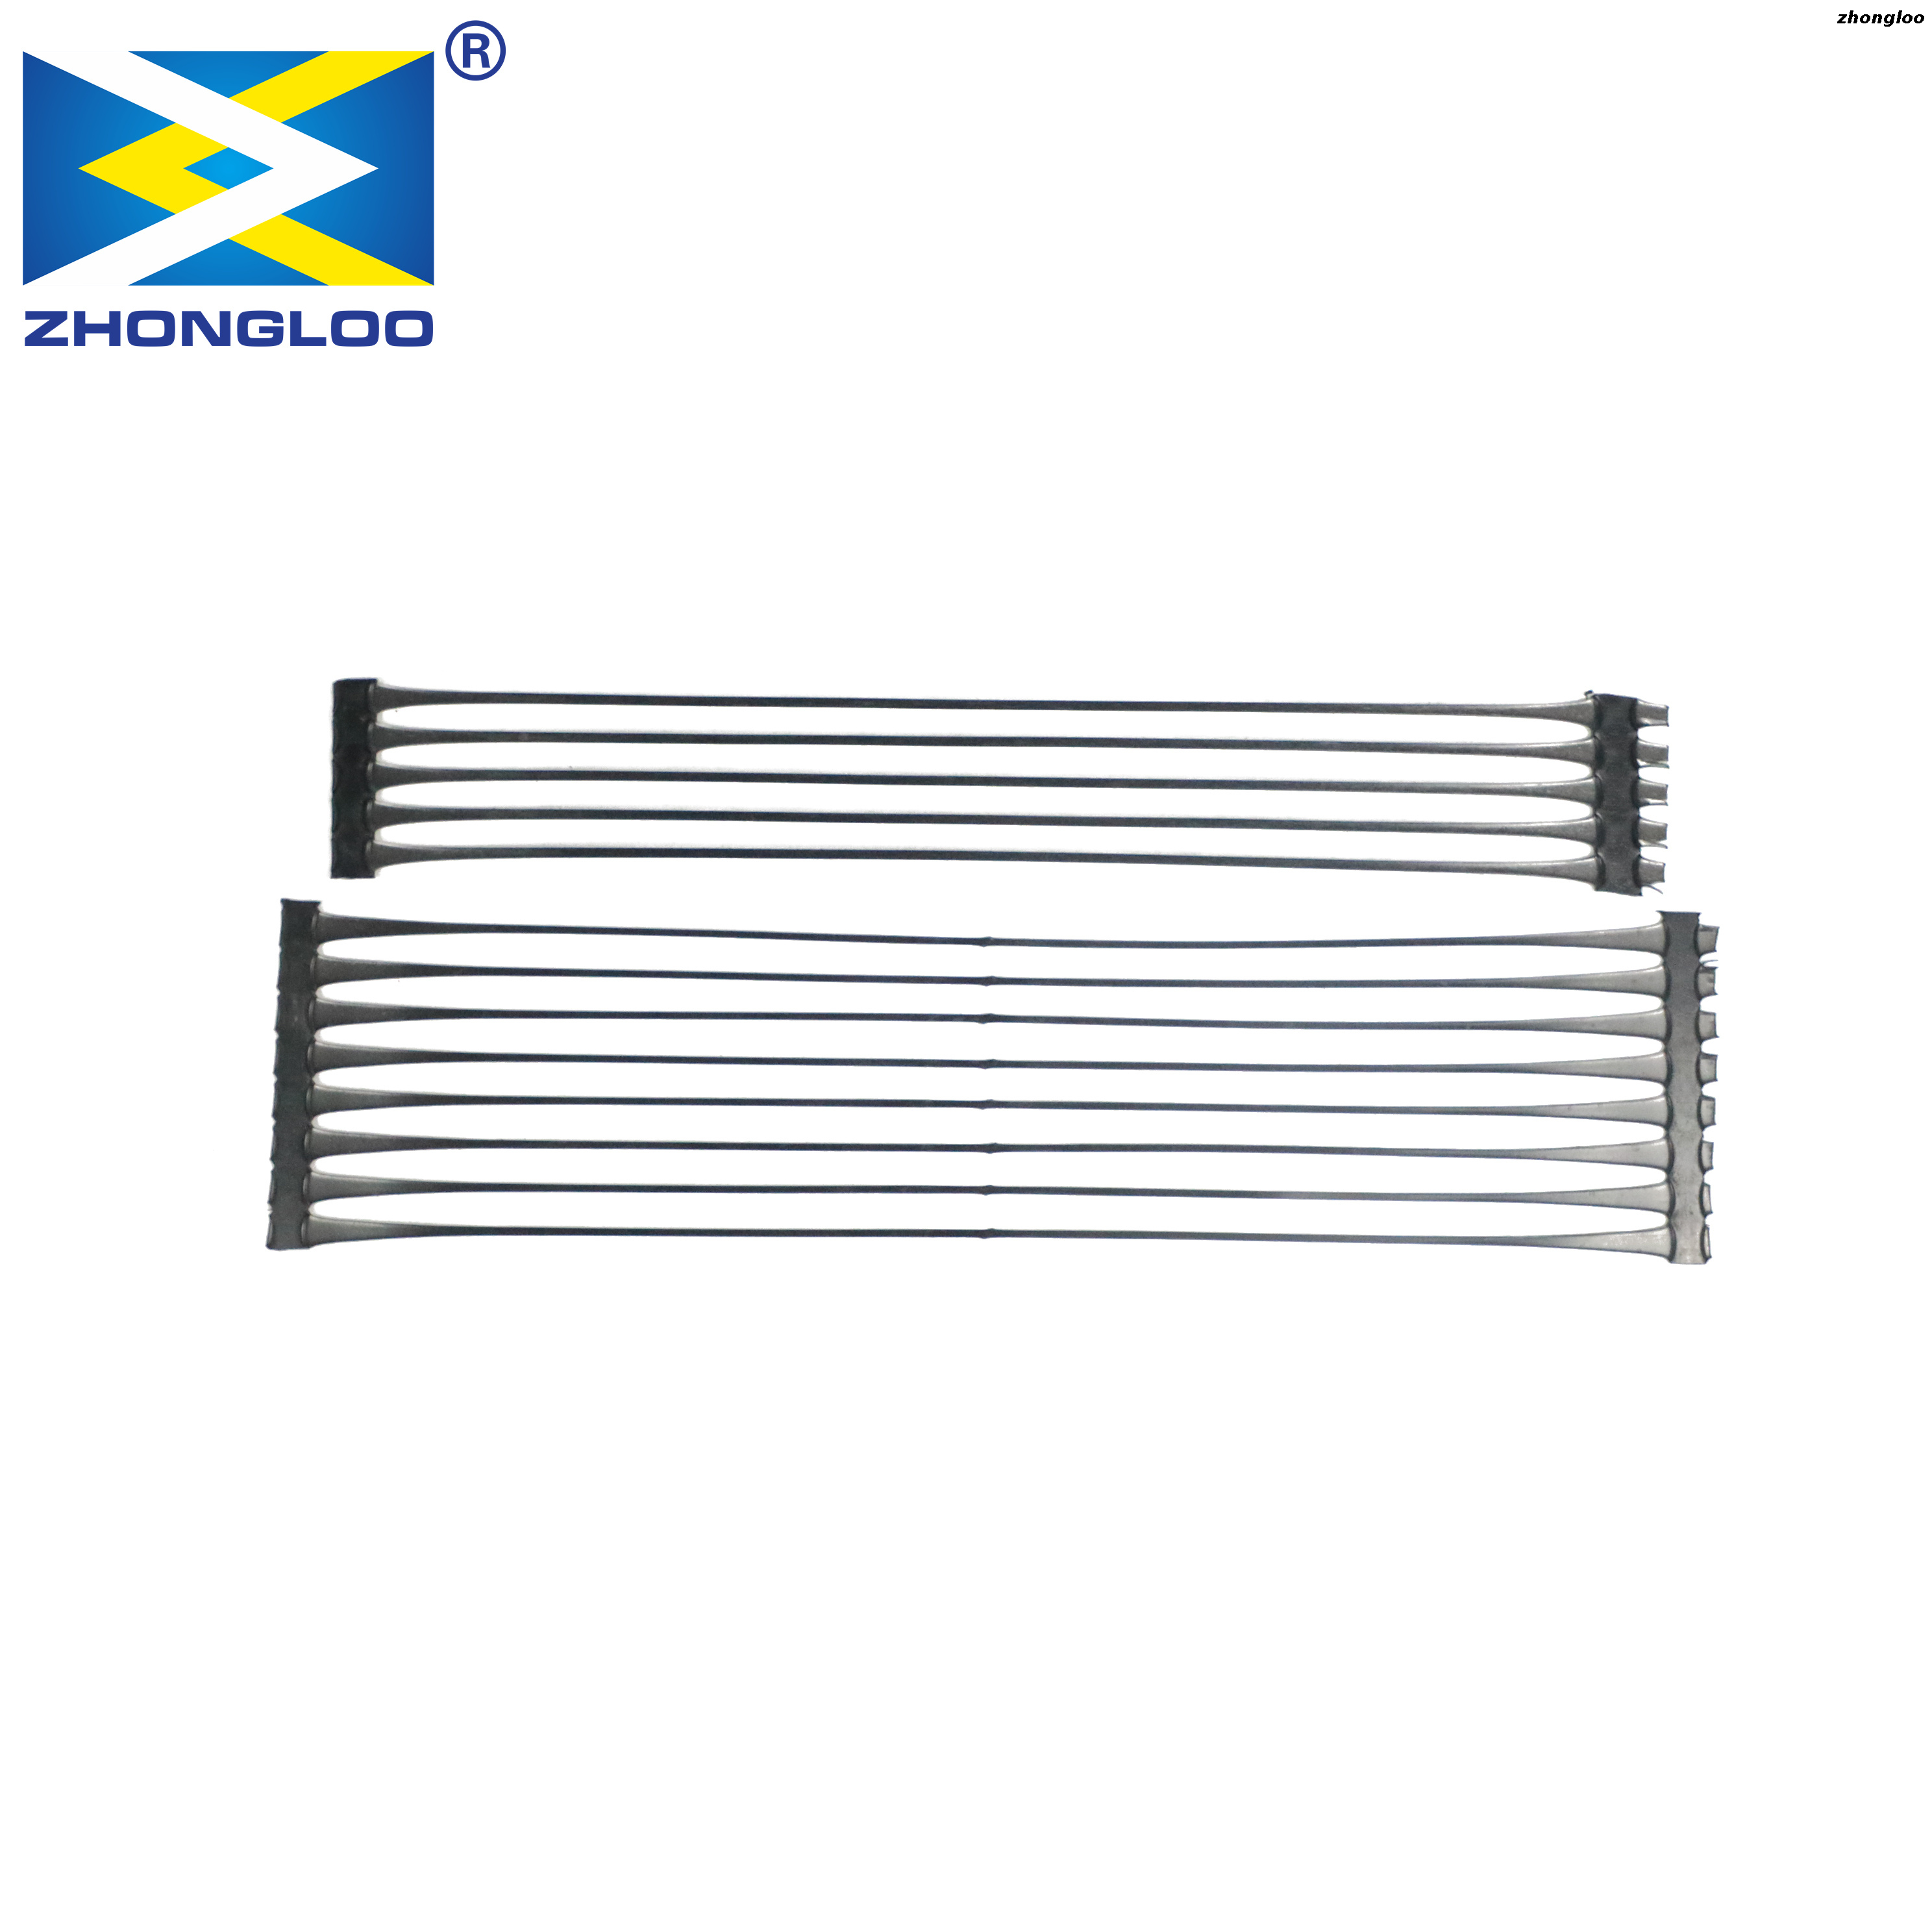  plastic PP Uniaxial fence mesh Geogrid for road driveway reinforcement